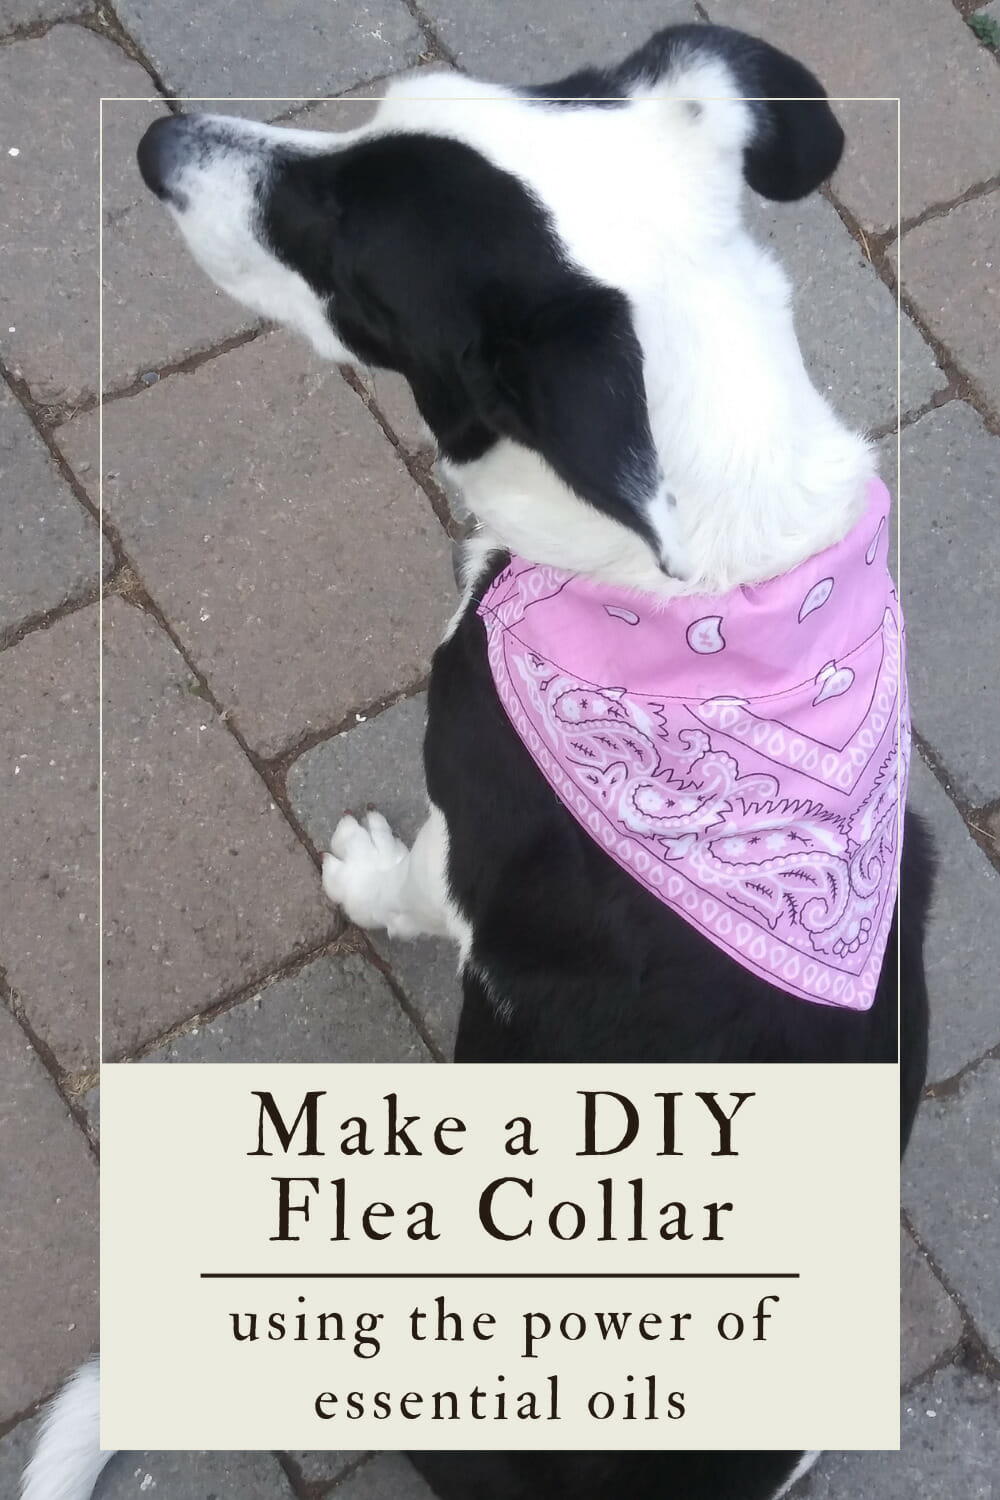 A pinterest-friendly graphic for DIY flea collars for dogs.